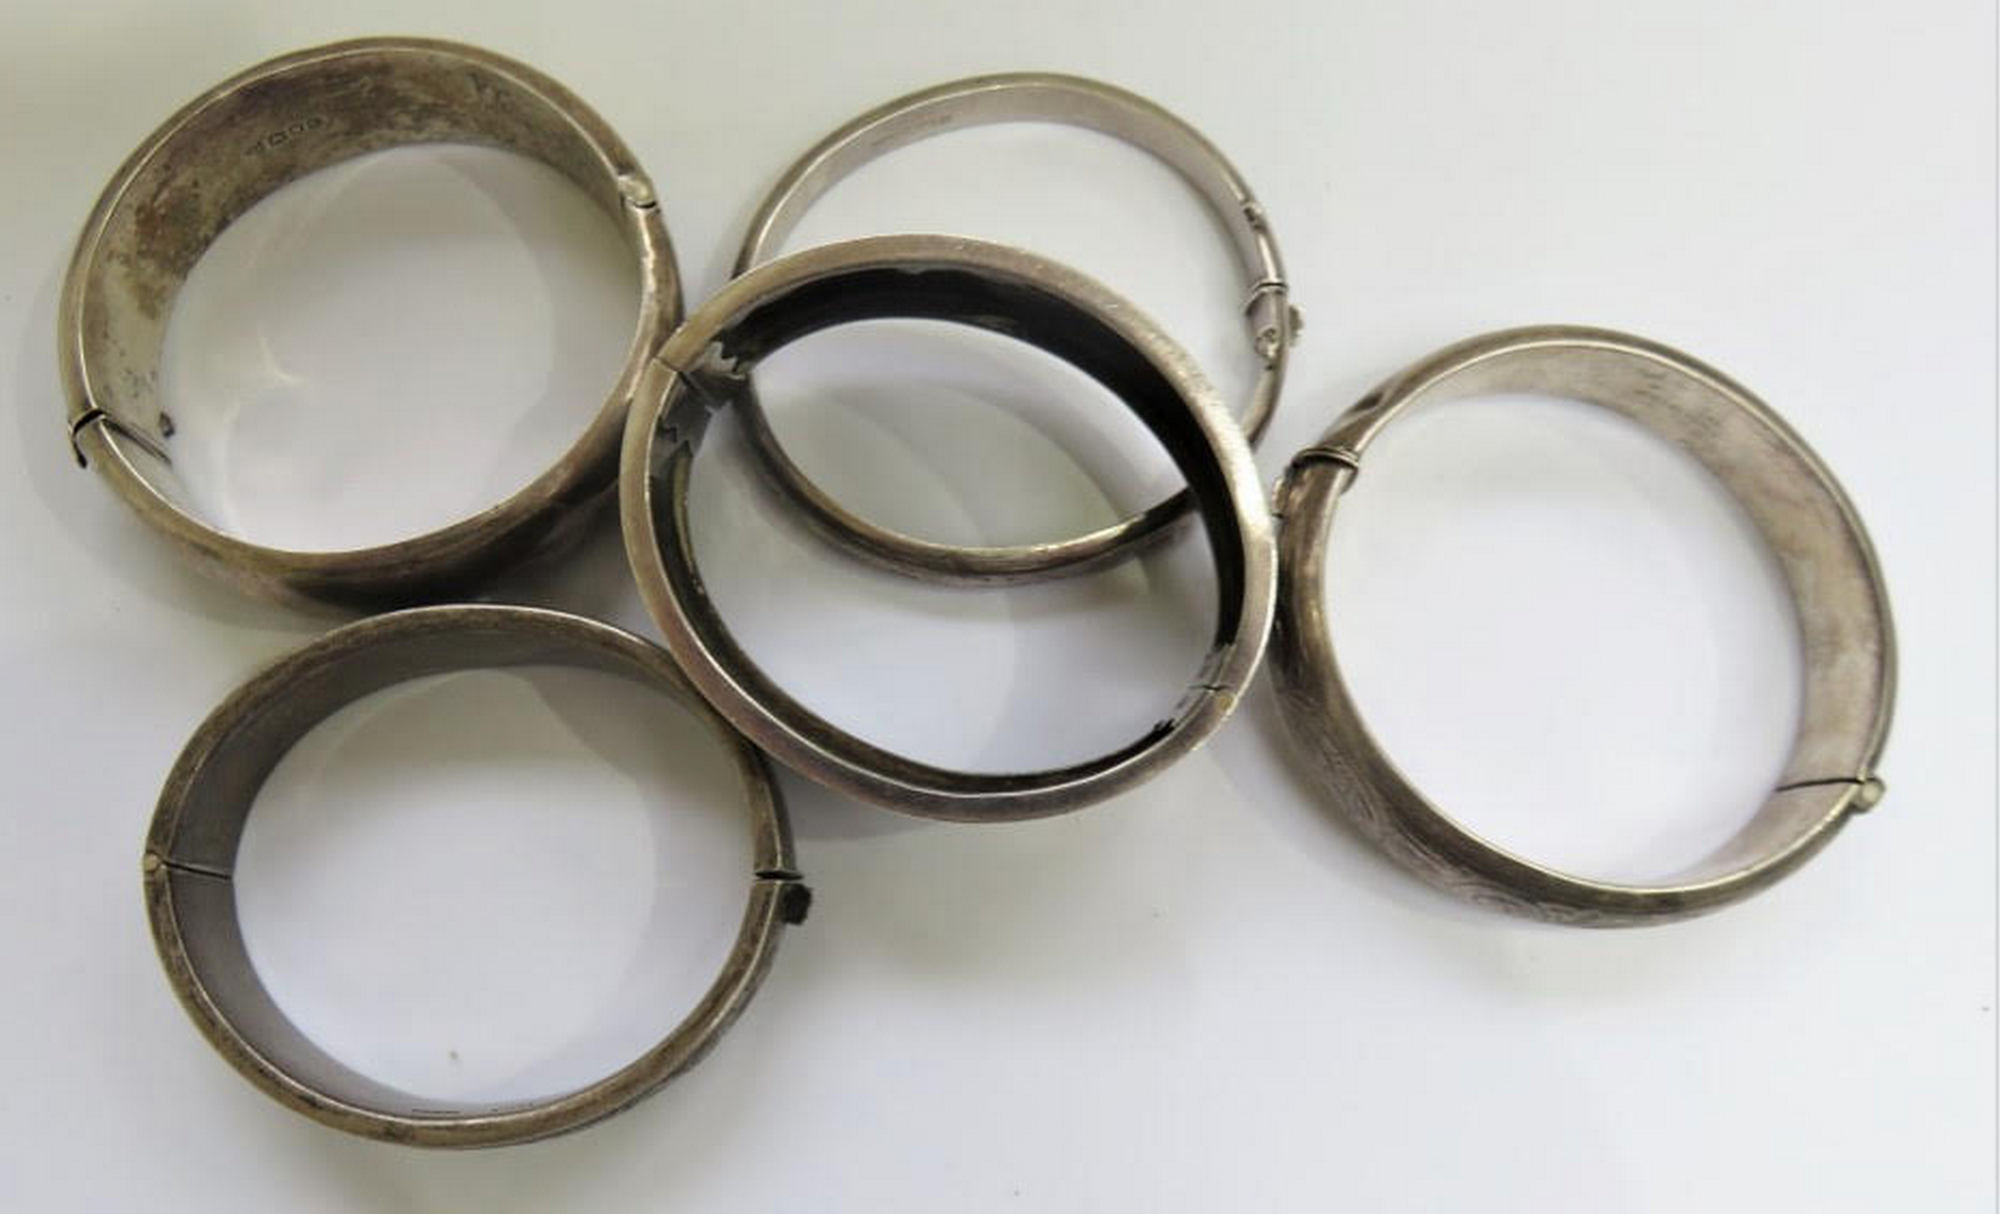 Lot of 5 Vintage Silver Bangles - 120 grams weight.